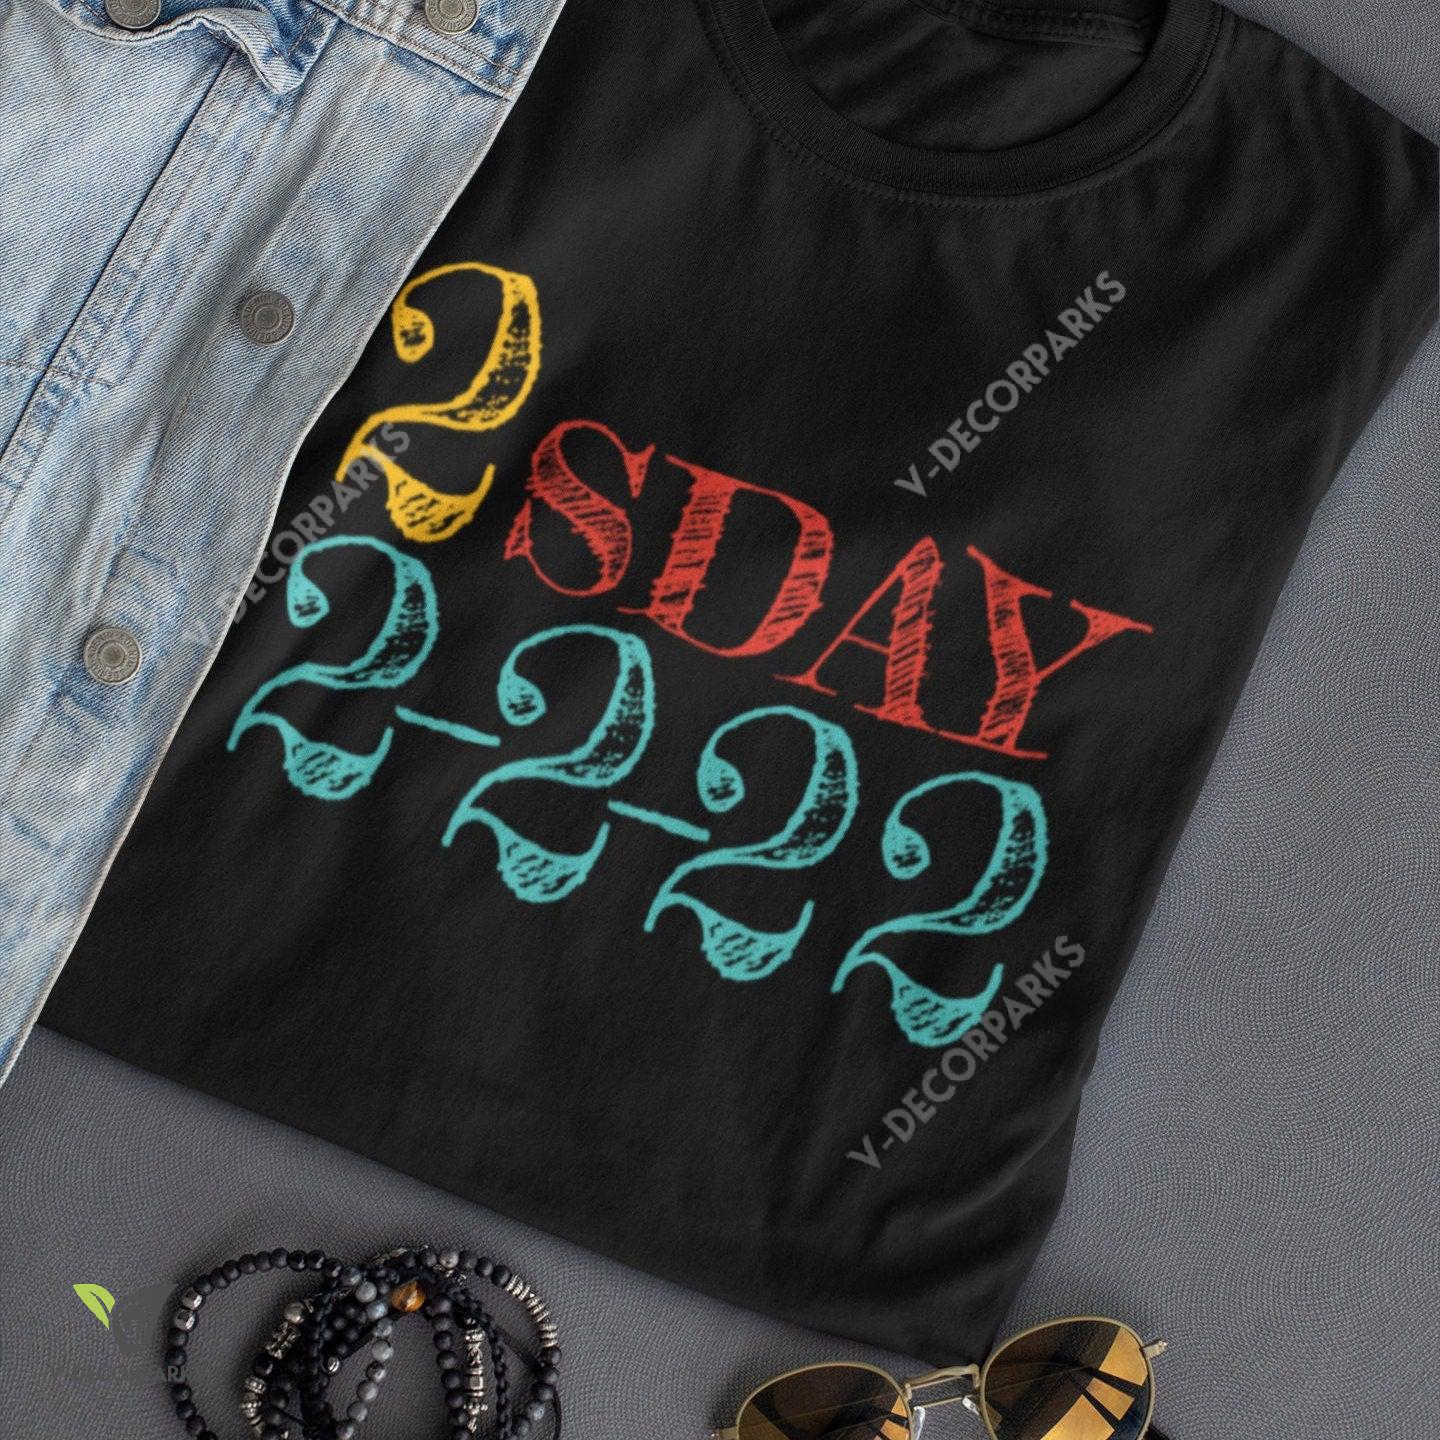 Numerology Date Shirt, Tuesday 2-2-22, February, Numerology, 2sday Shirt 222 Angel Numbers Gift For Pisces Born In February